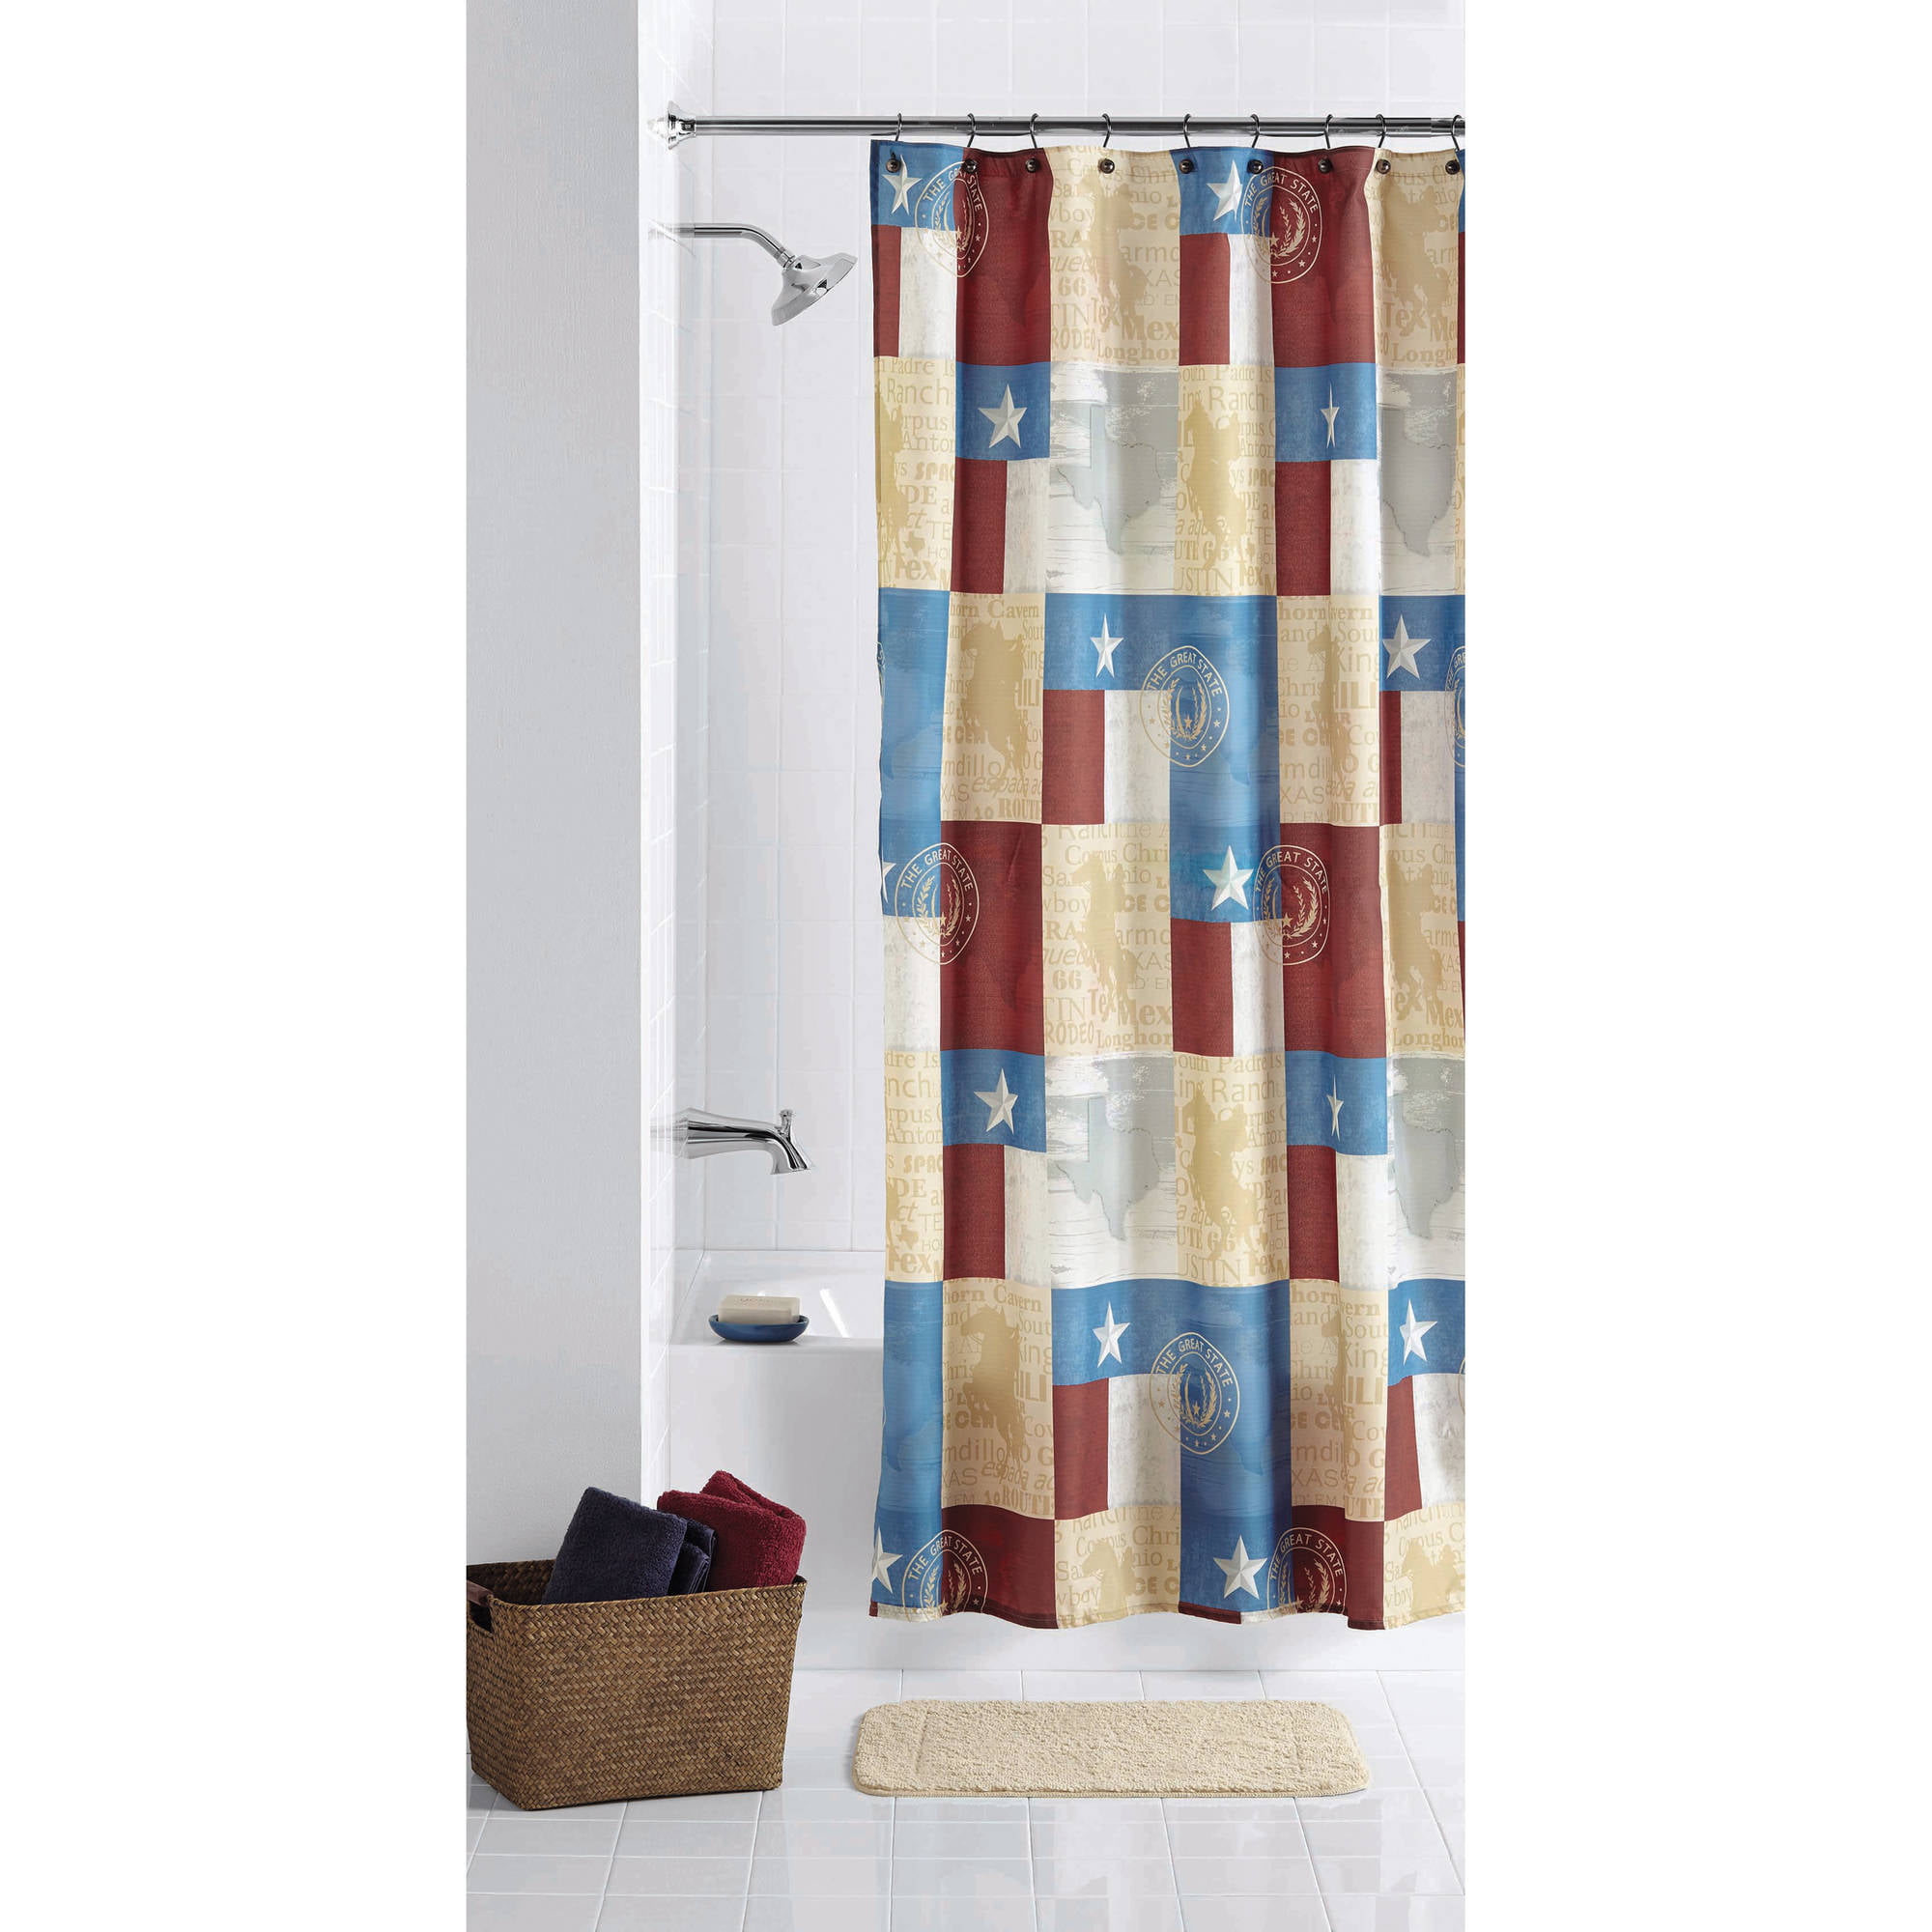 Fabric Shower Curtain, Mainstays Polyester 70 X 72 Solace Printed Shower Curtain